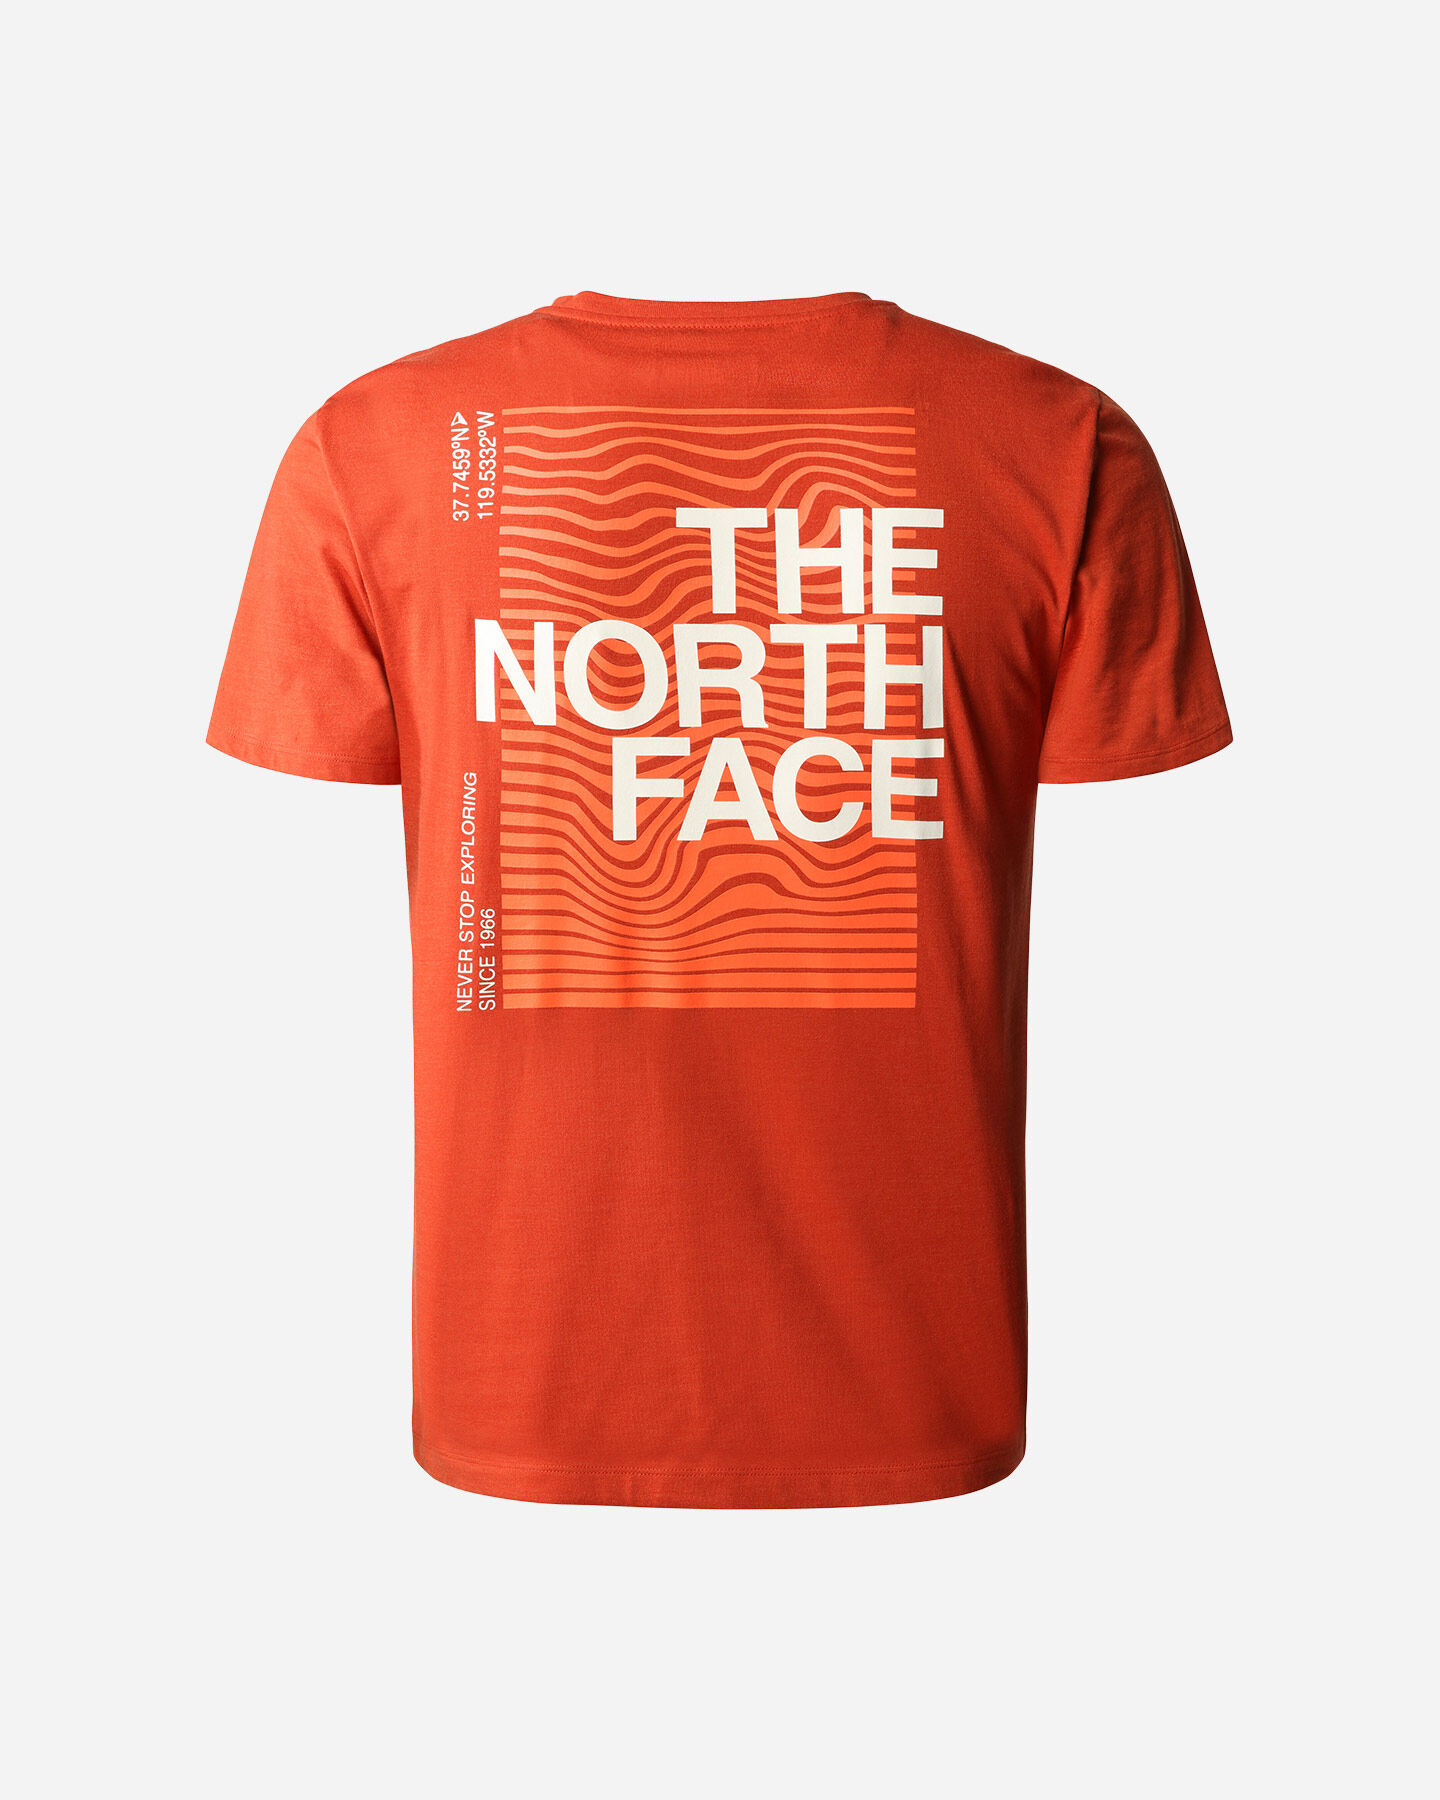  T-Shirt THE NORTH FACE FOUNDATION M S5536019|LV4|S scatto 1